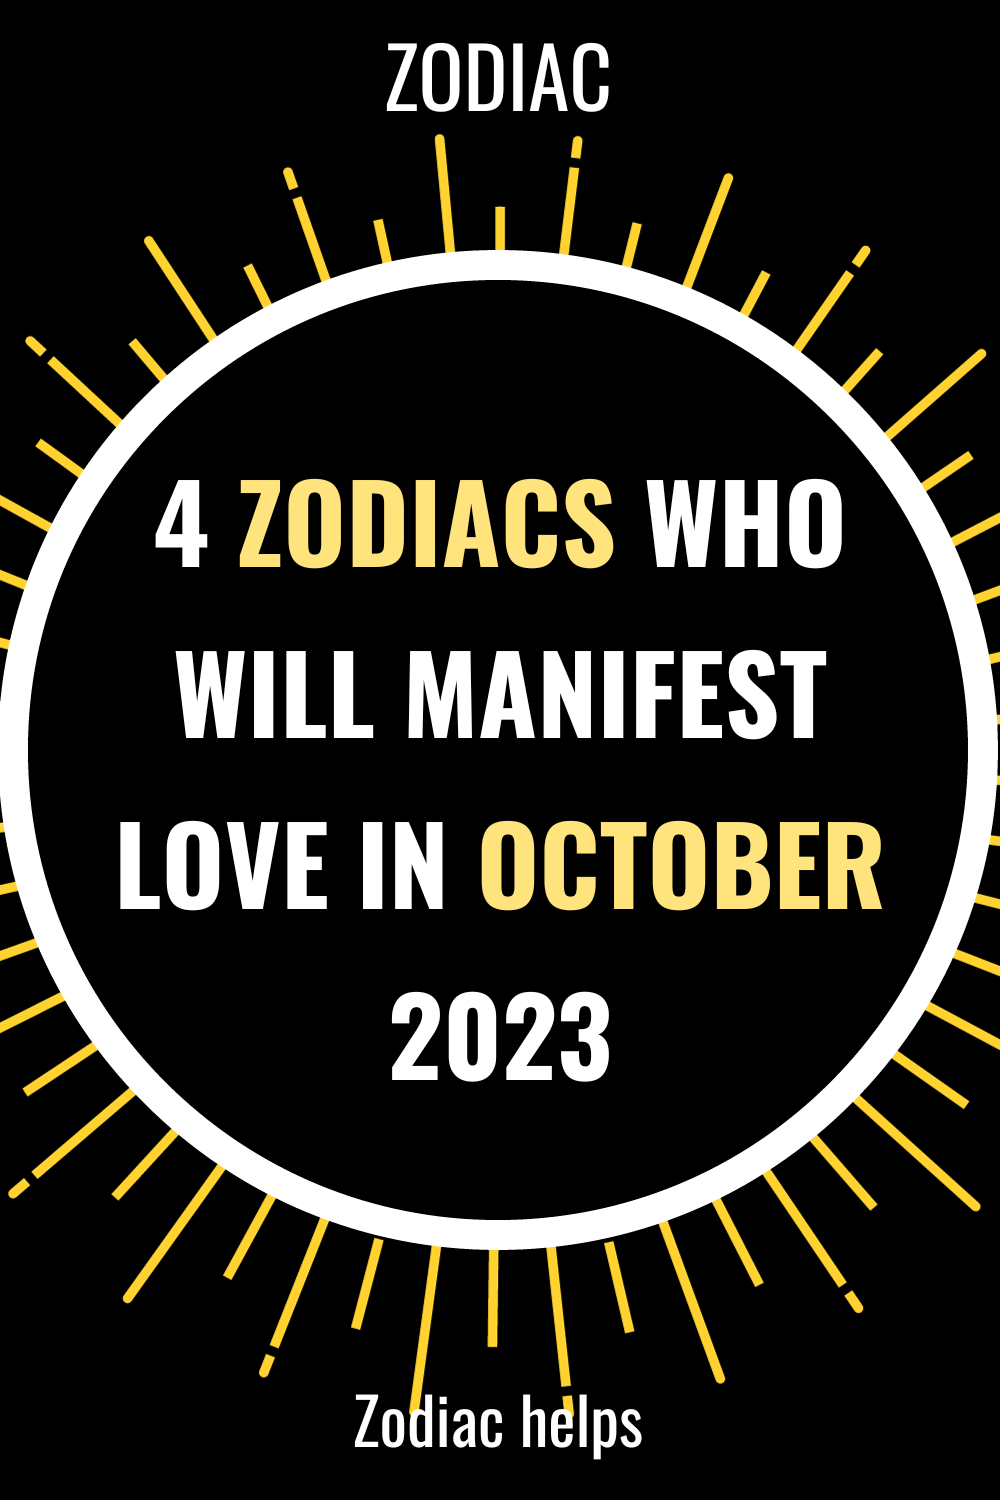 4 Zodiacs Who Will Manifest Love In October 2023